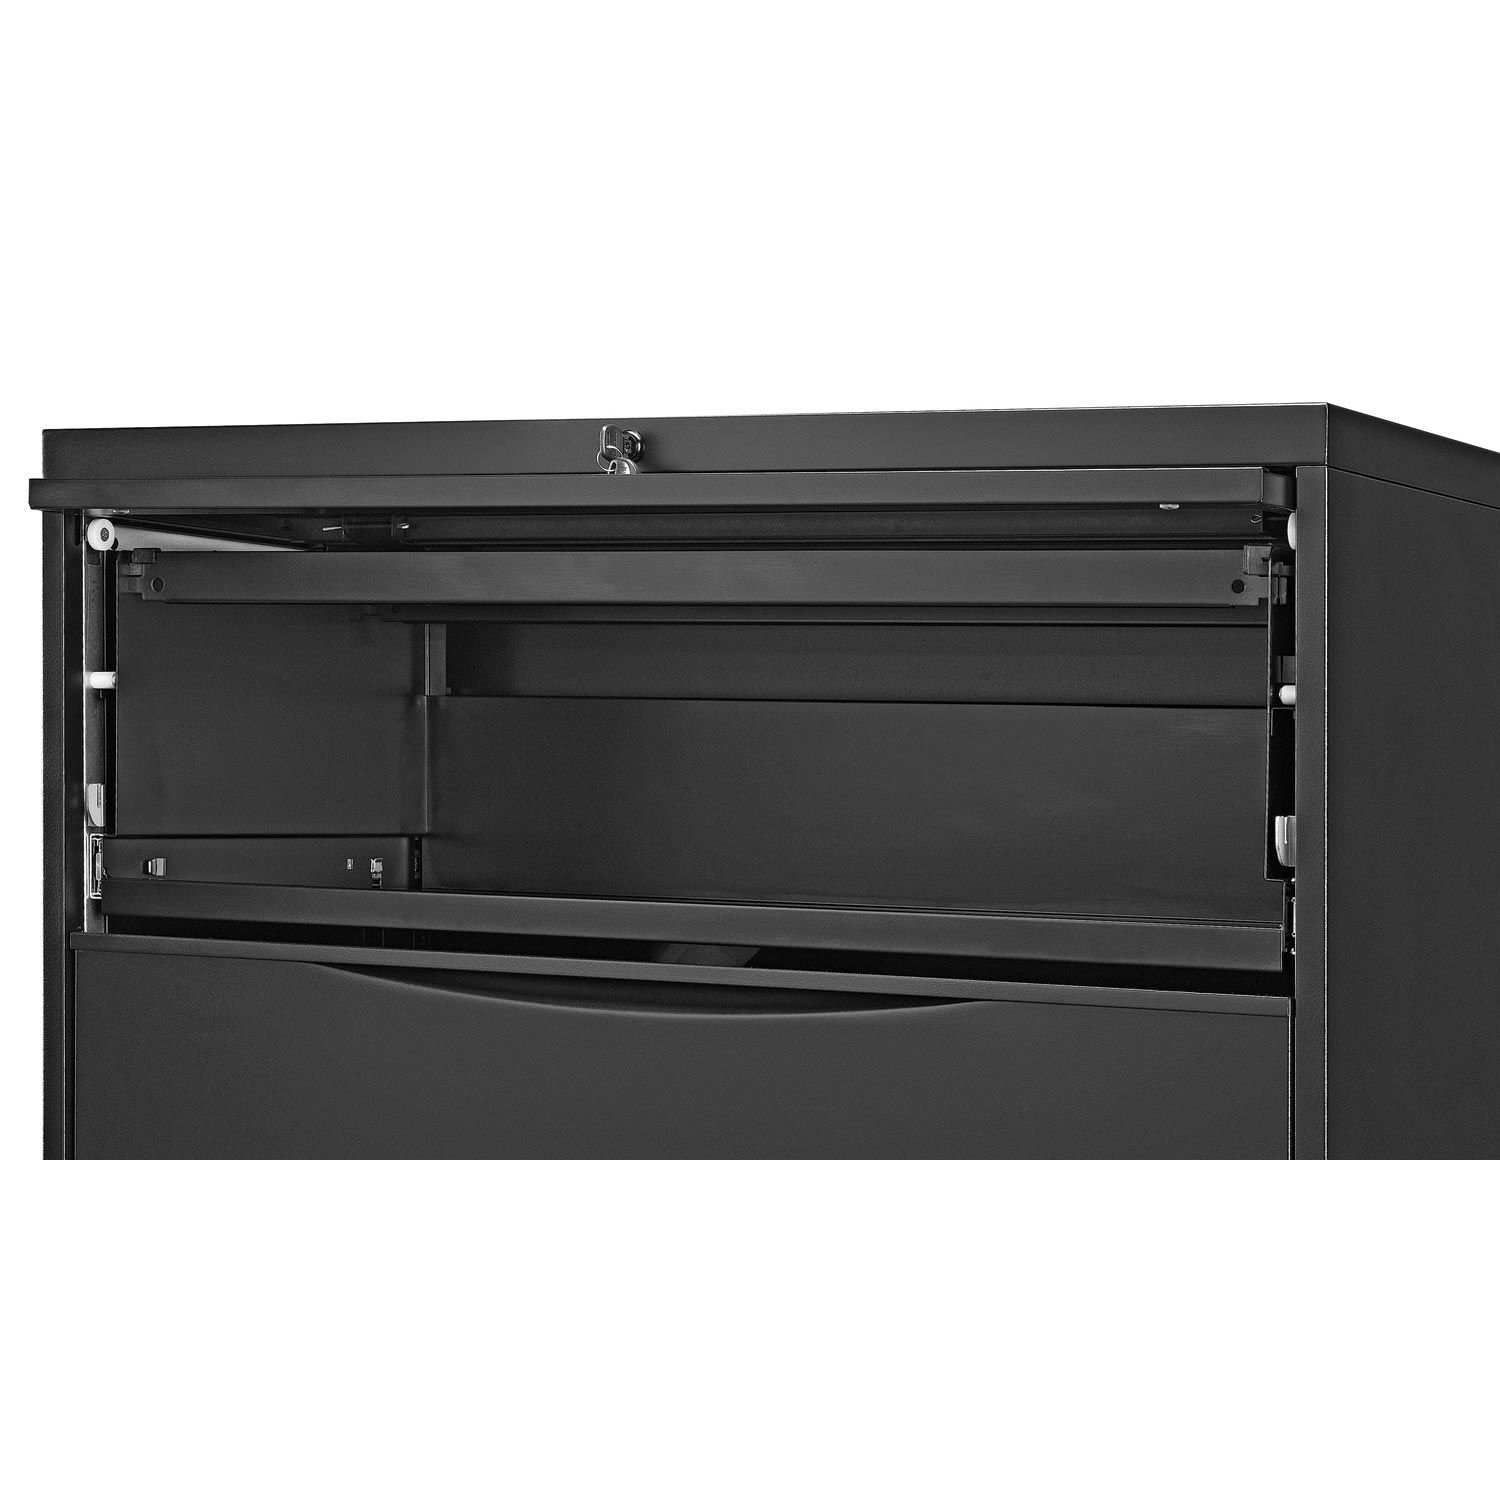 Global Industries 252468BK Interion 30 in. Premium Lateral File Cabinet 5 Drawer, Black - image 3 of 4